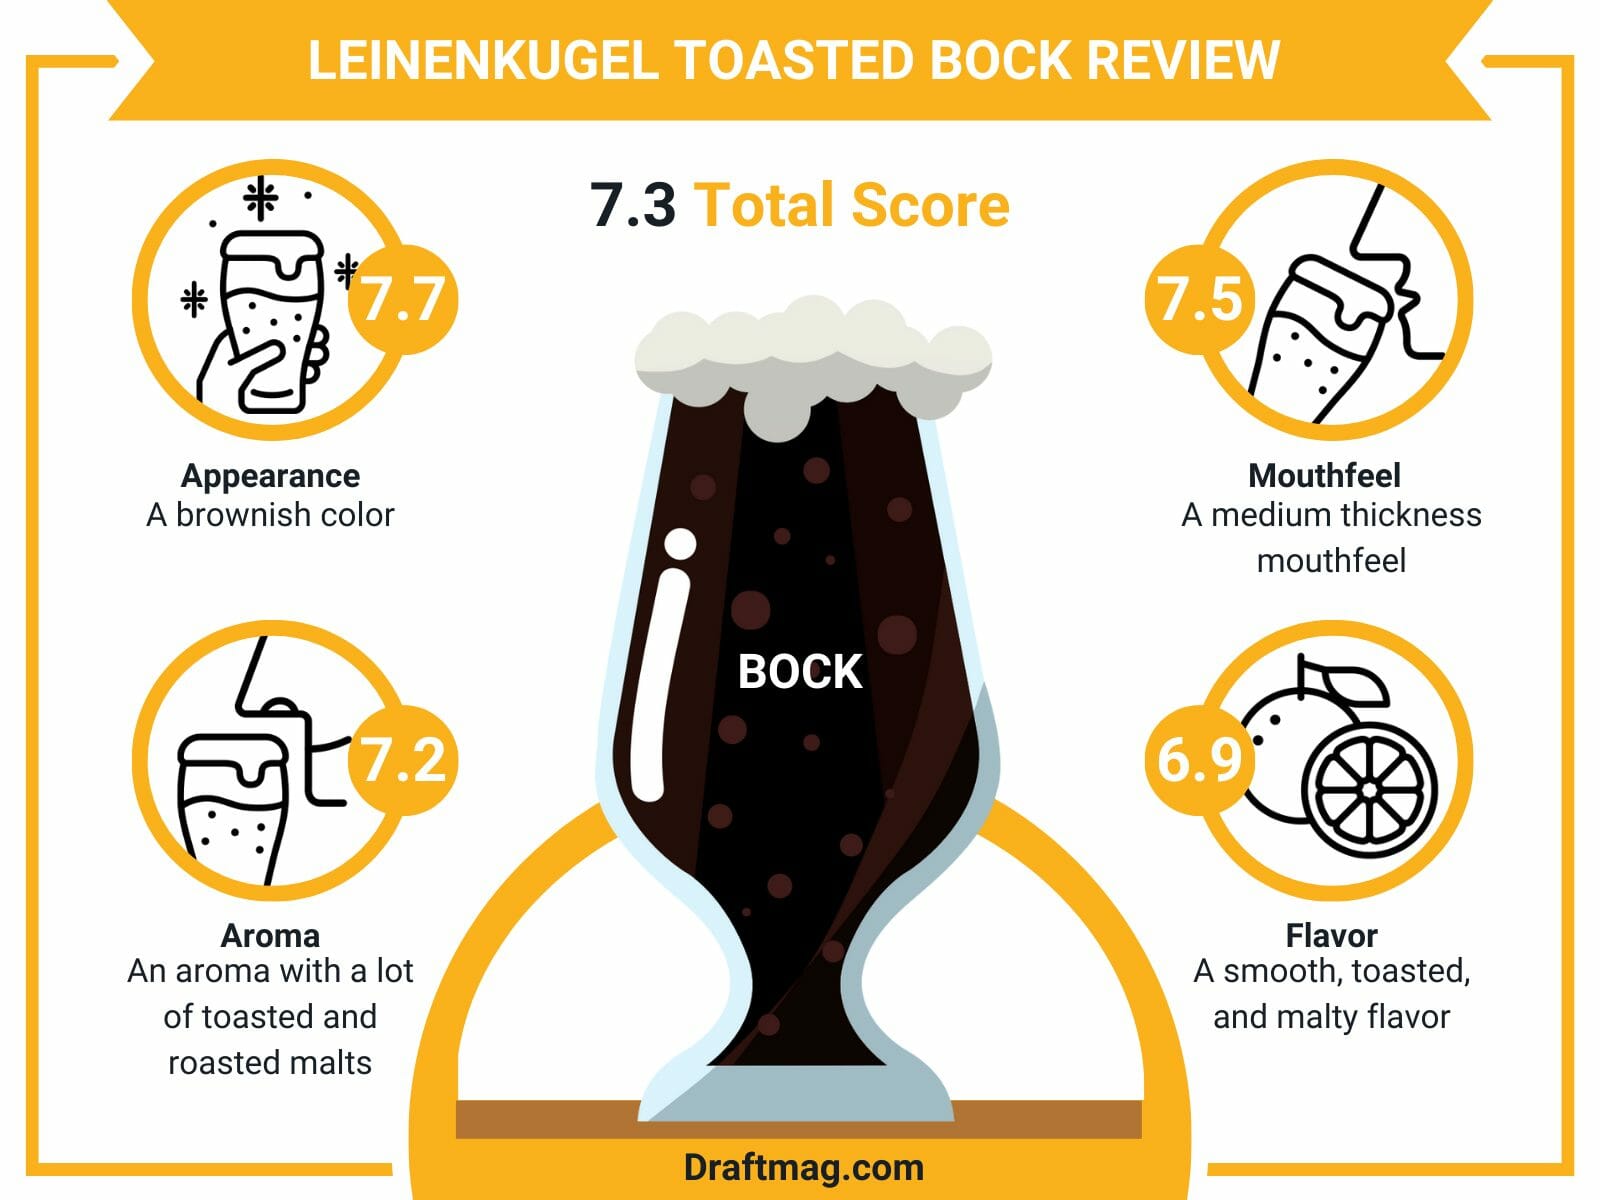 Leinenkugel toasted bock review infographic